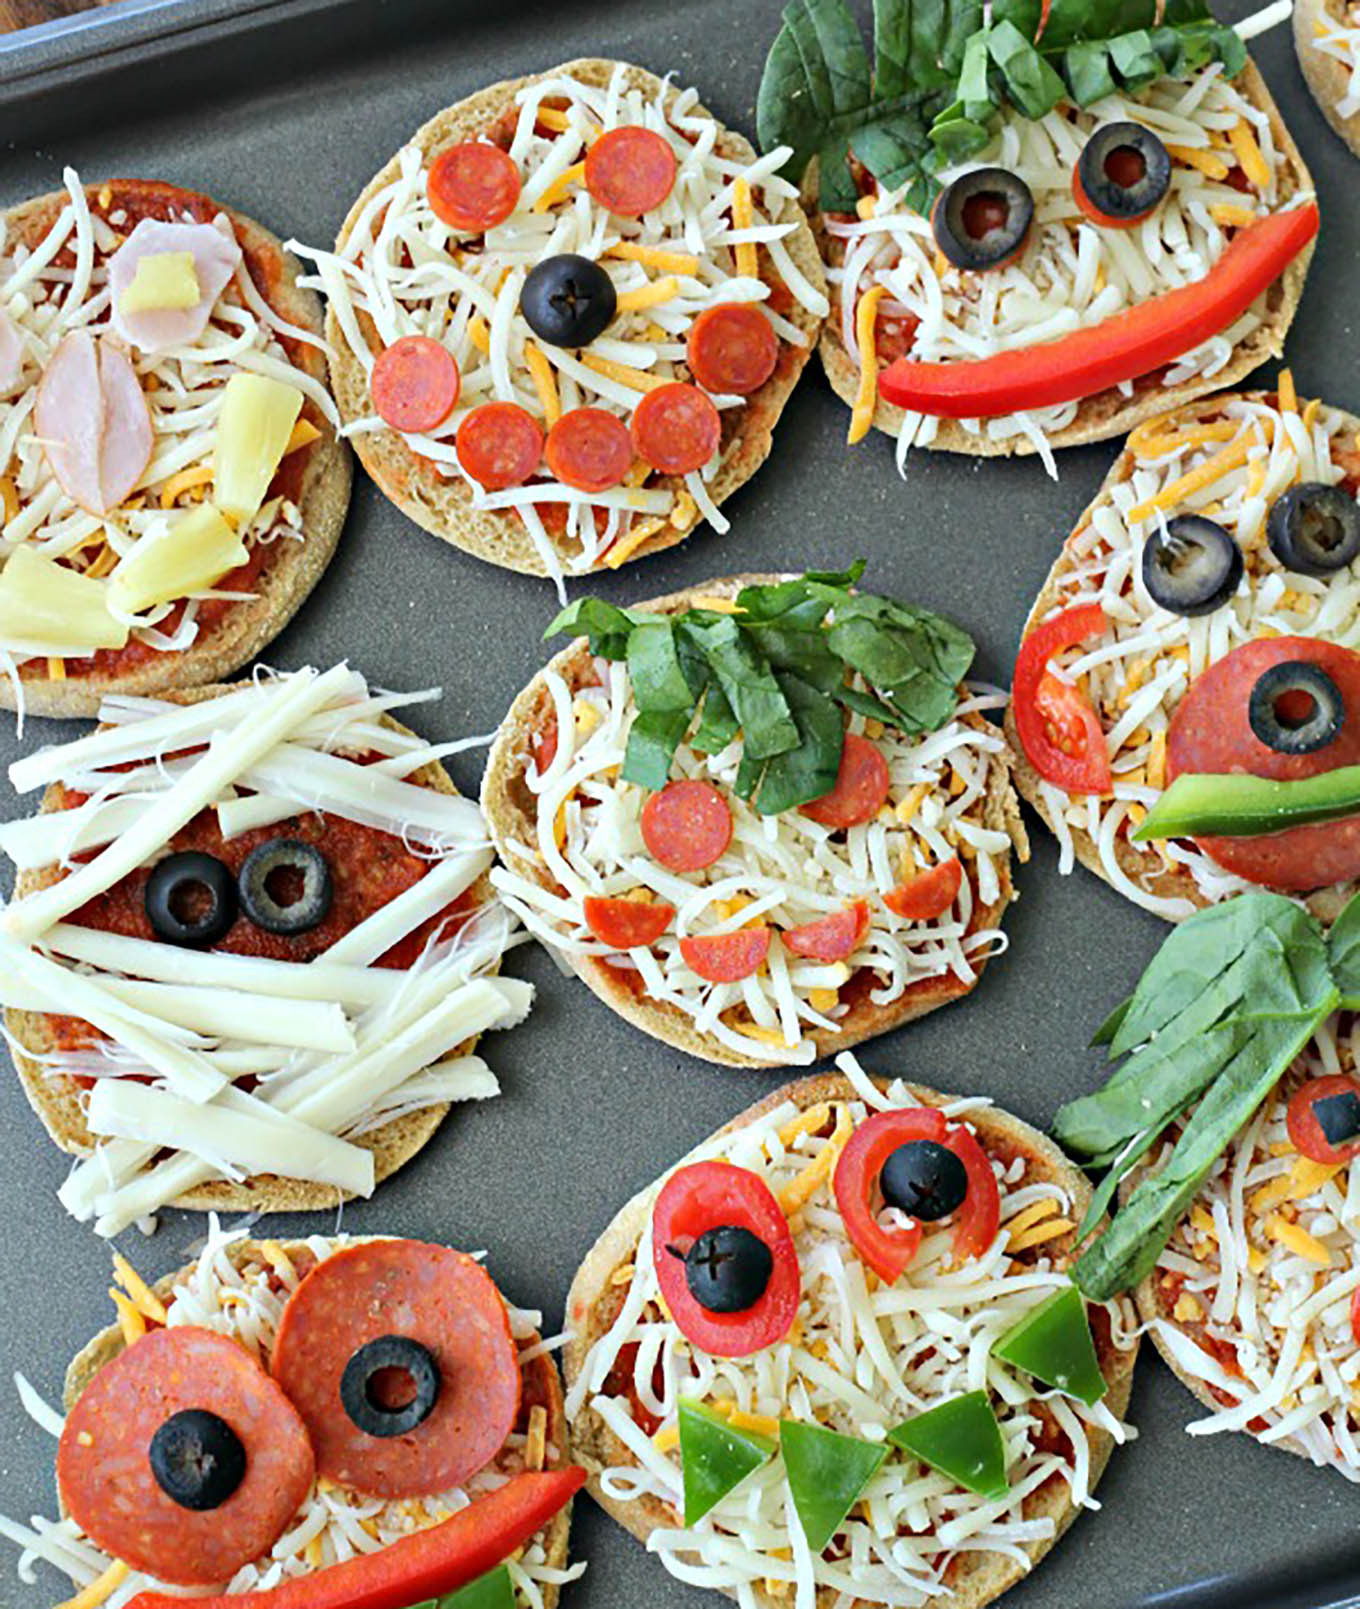 Cool Recipes For Kids
 5 Fun & Yummy Recipes For The Kids